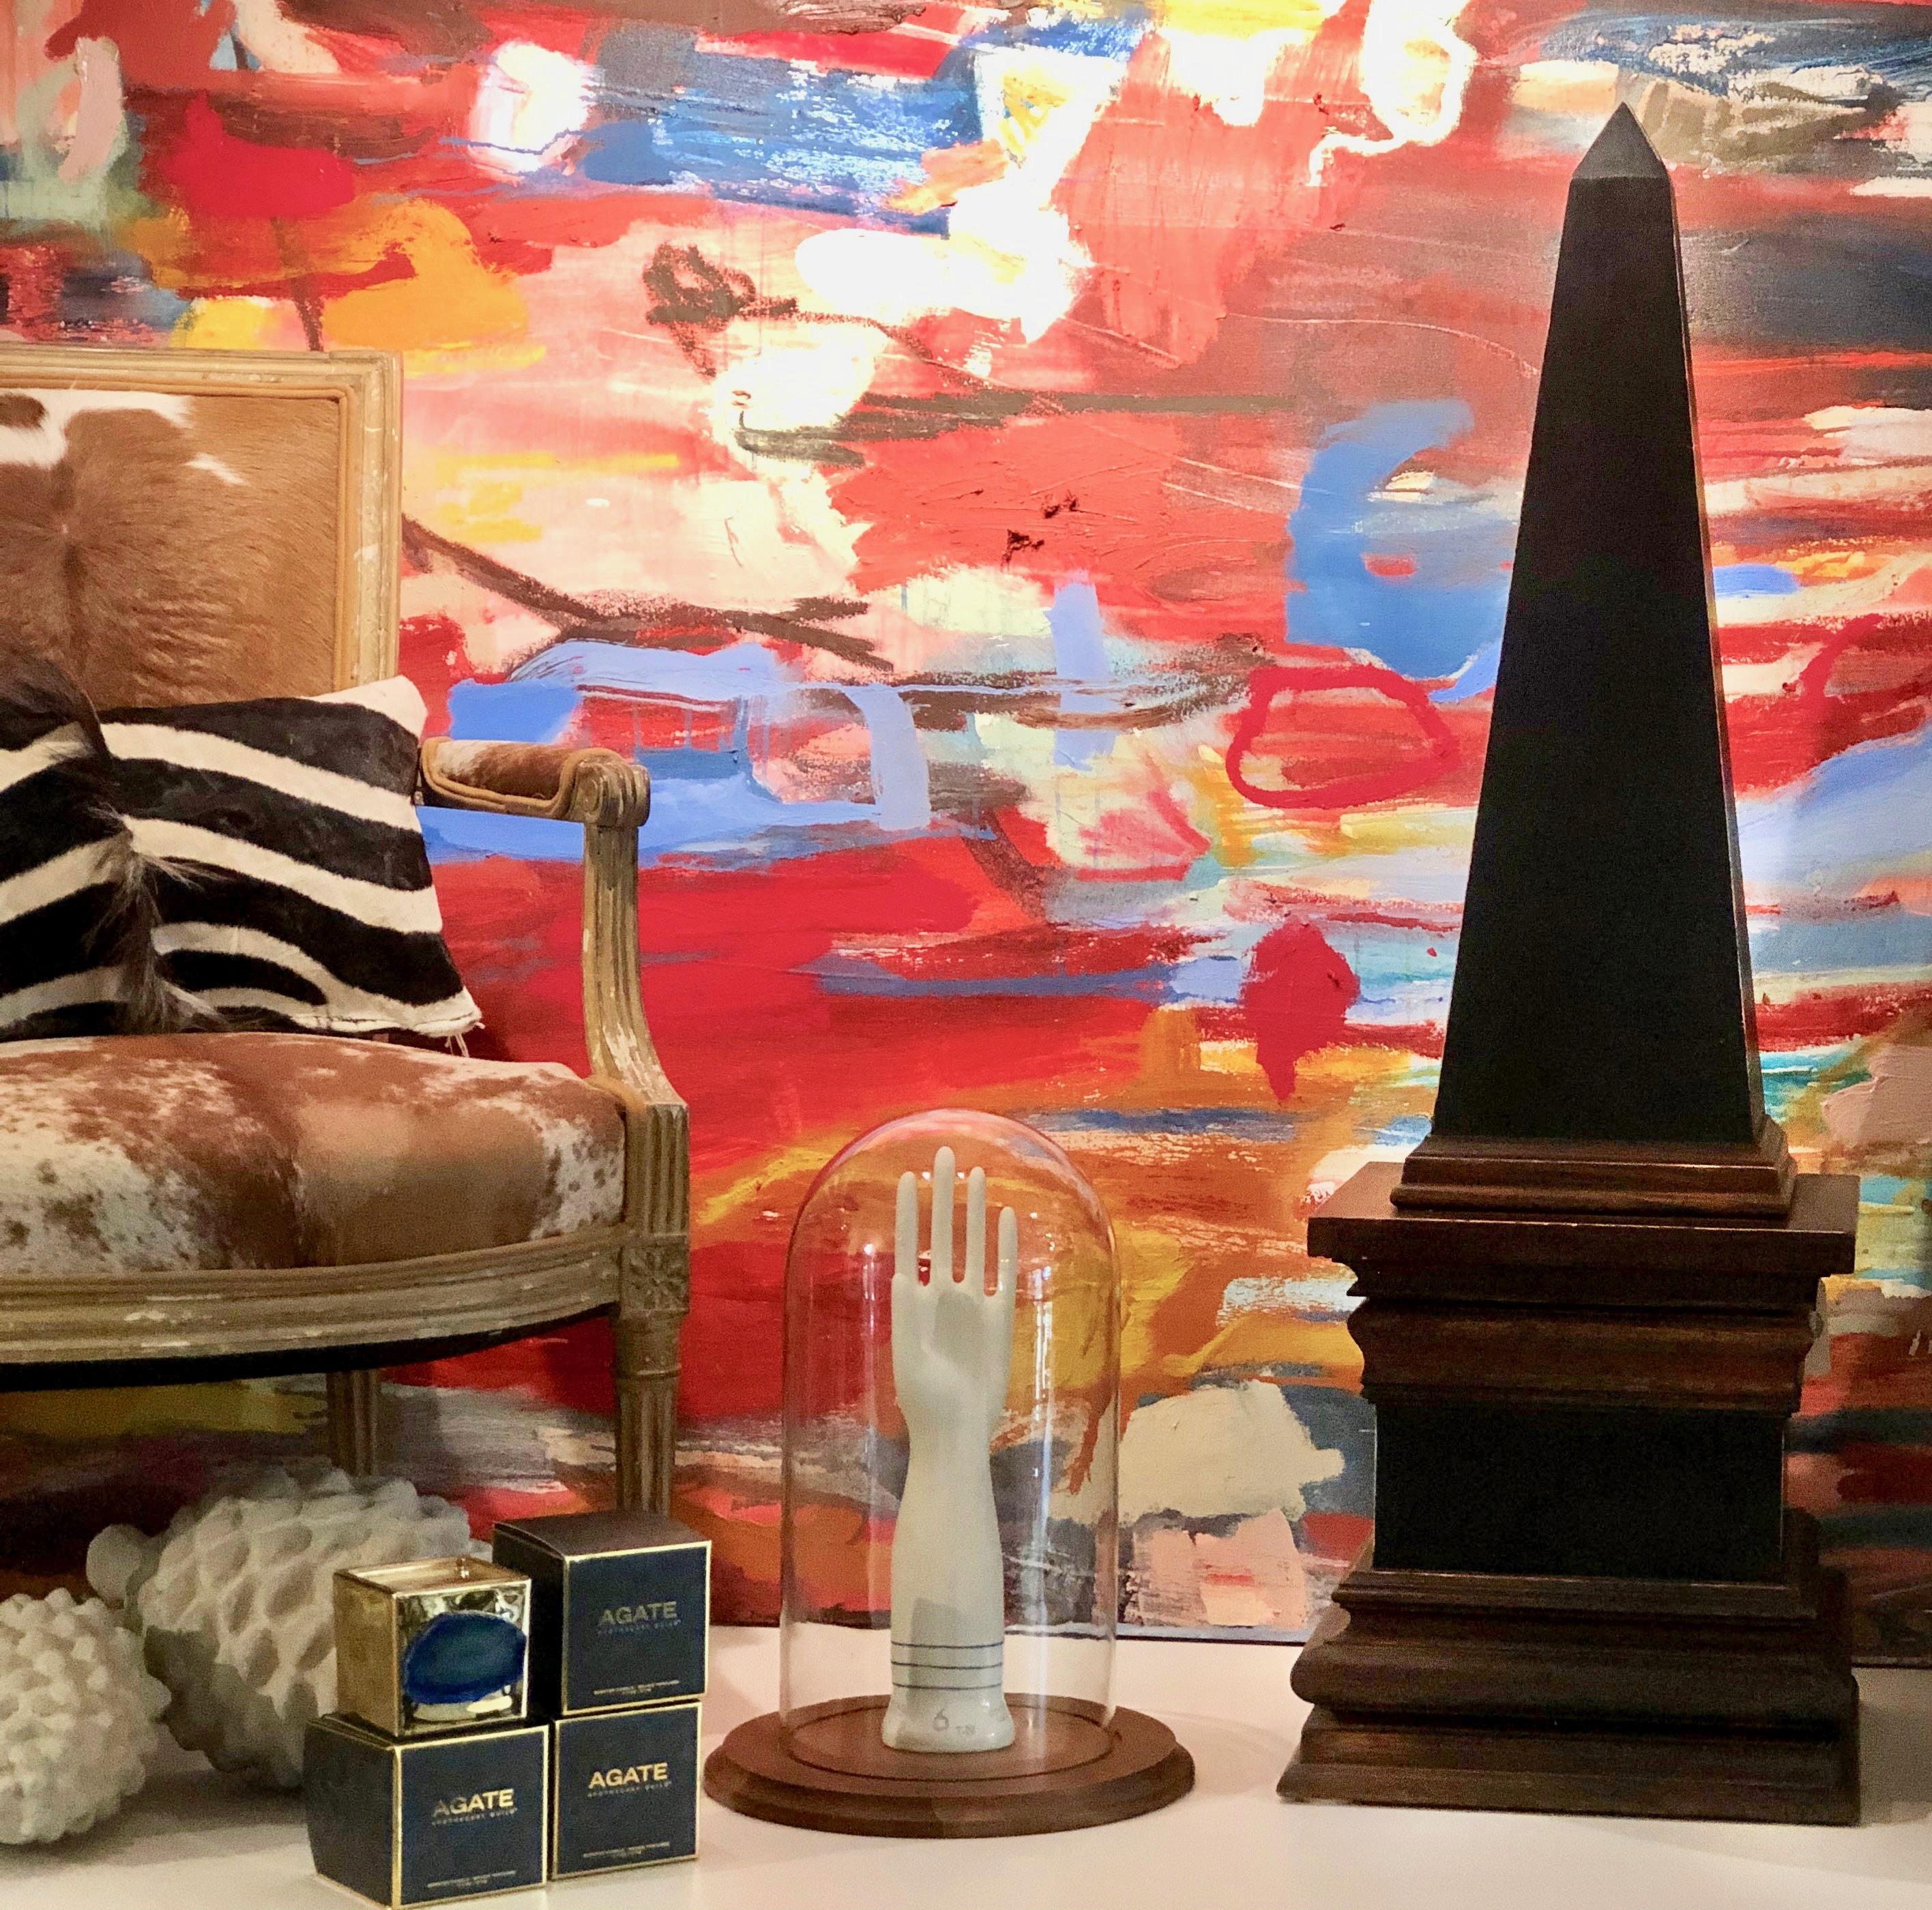 This large wooden obelisk is designed by Barbara Cogrove. It was used as a template in creating her accessory and lamp line. After two decades, Barbara Cosgrove is retired and closed her eponymous lamp and home accessories company. It is a rare and